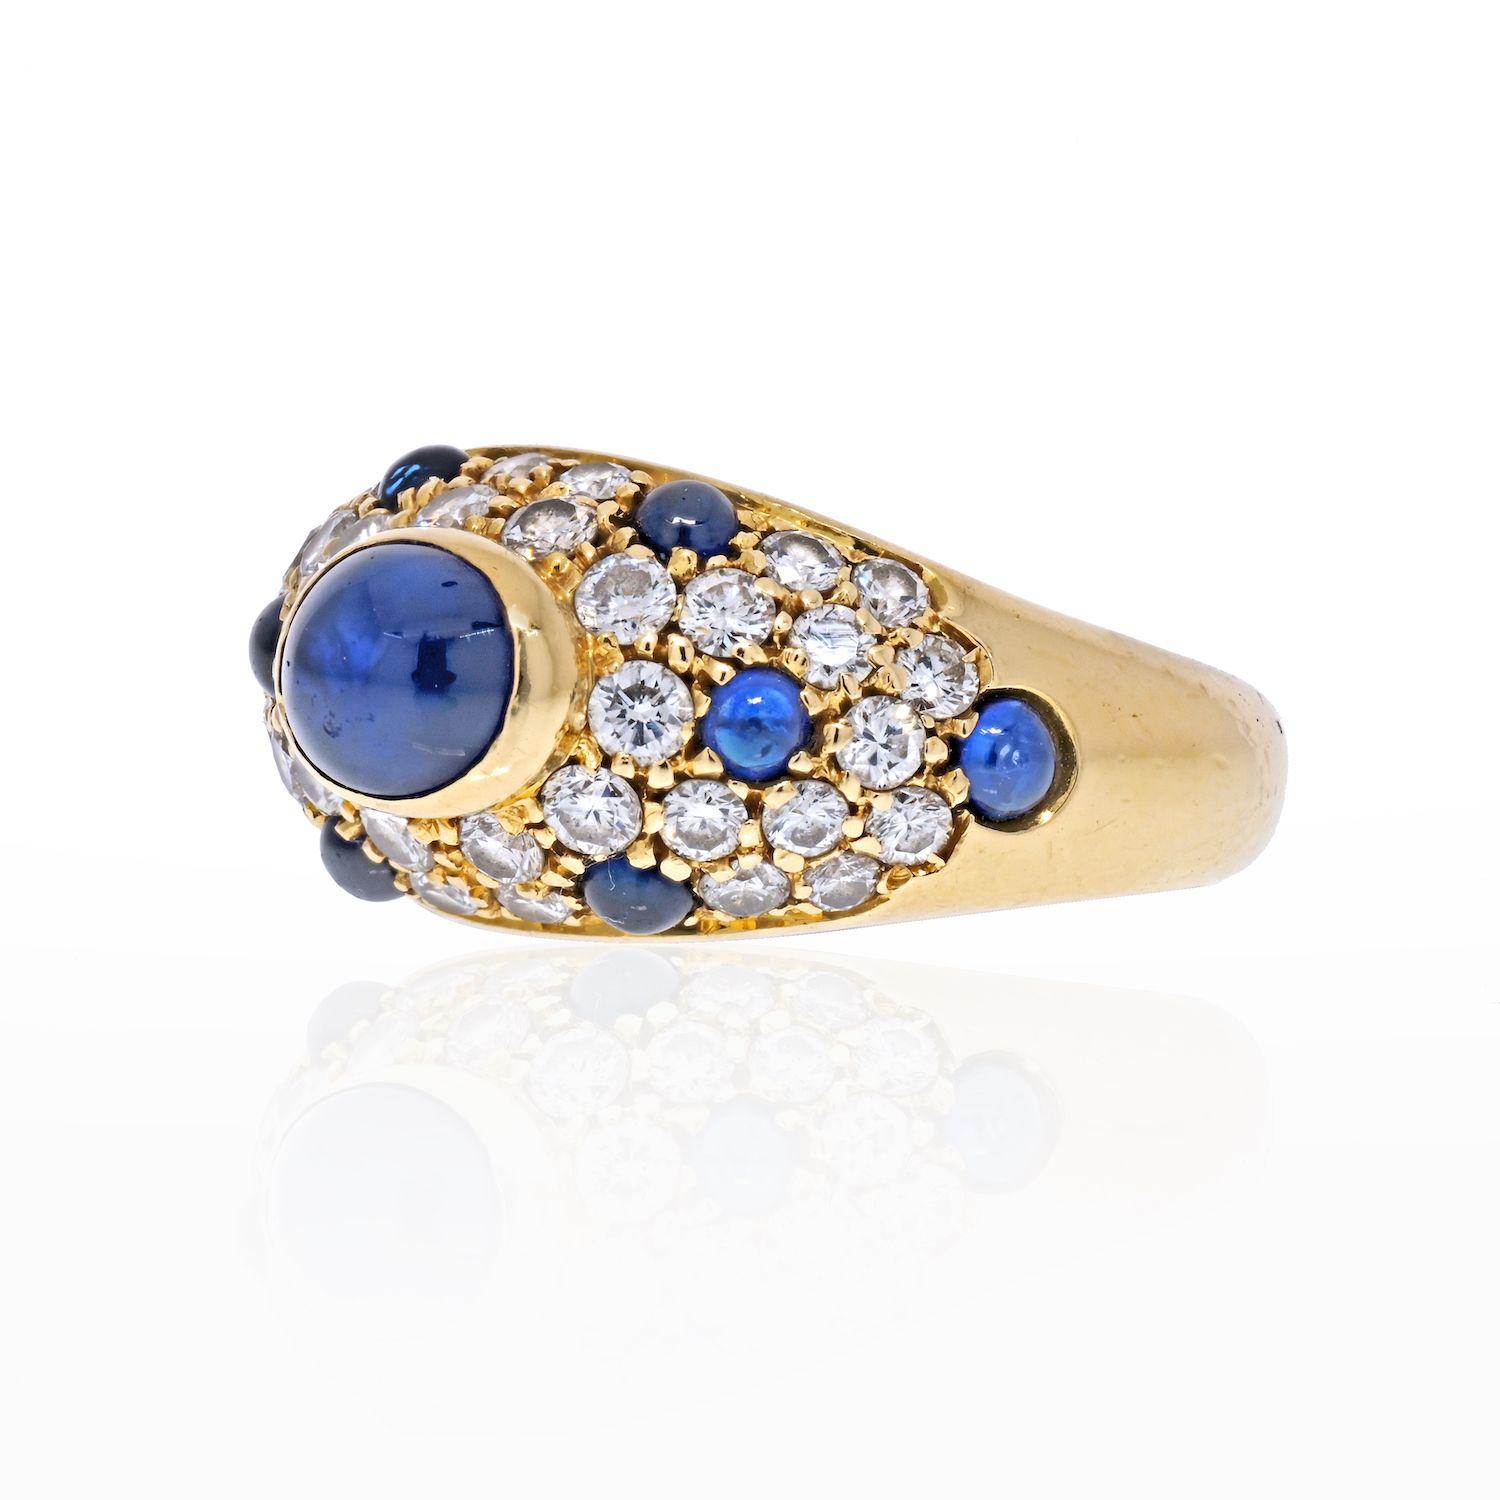 A beautiful vintage Cartier sapphire and diamond dome ring set in 18k yellow gold.
The ring is predominantly set with a large cabochon oval sapphire which is rub over set to centre. Surrounding this sapphire is a display of pave set diamonds and